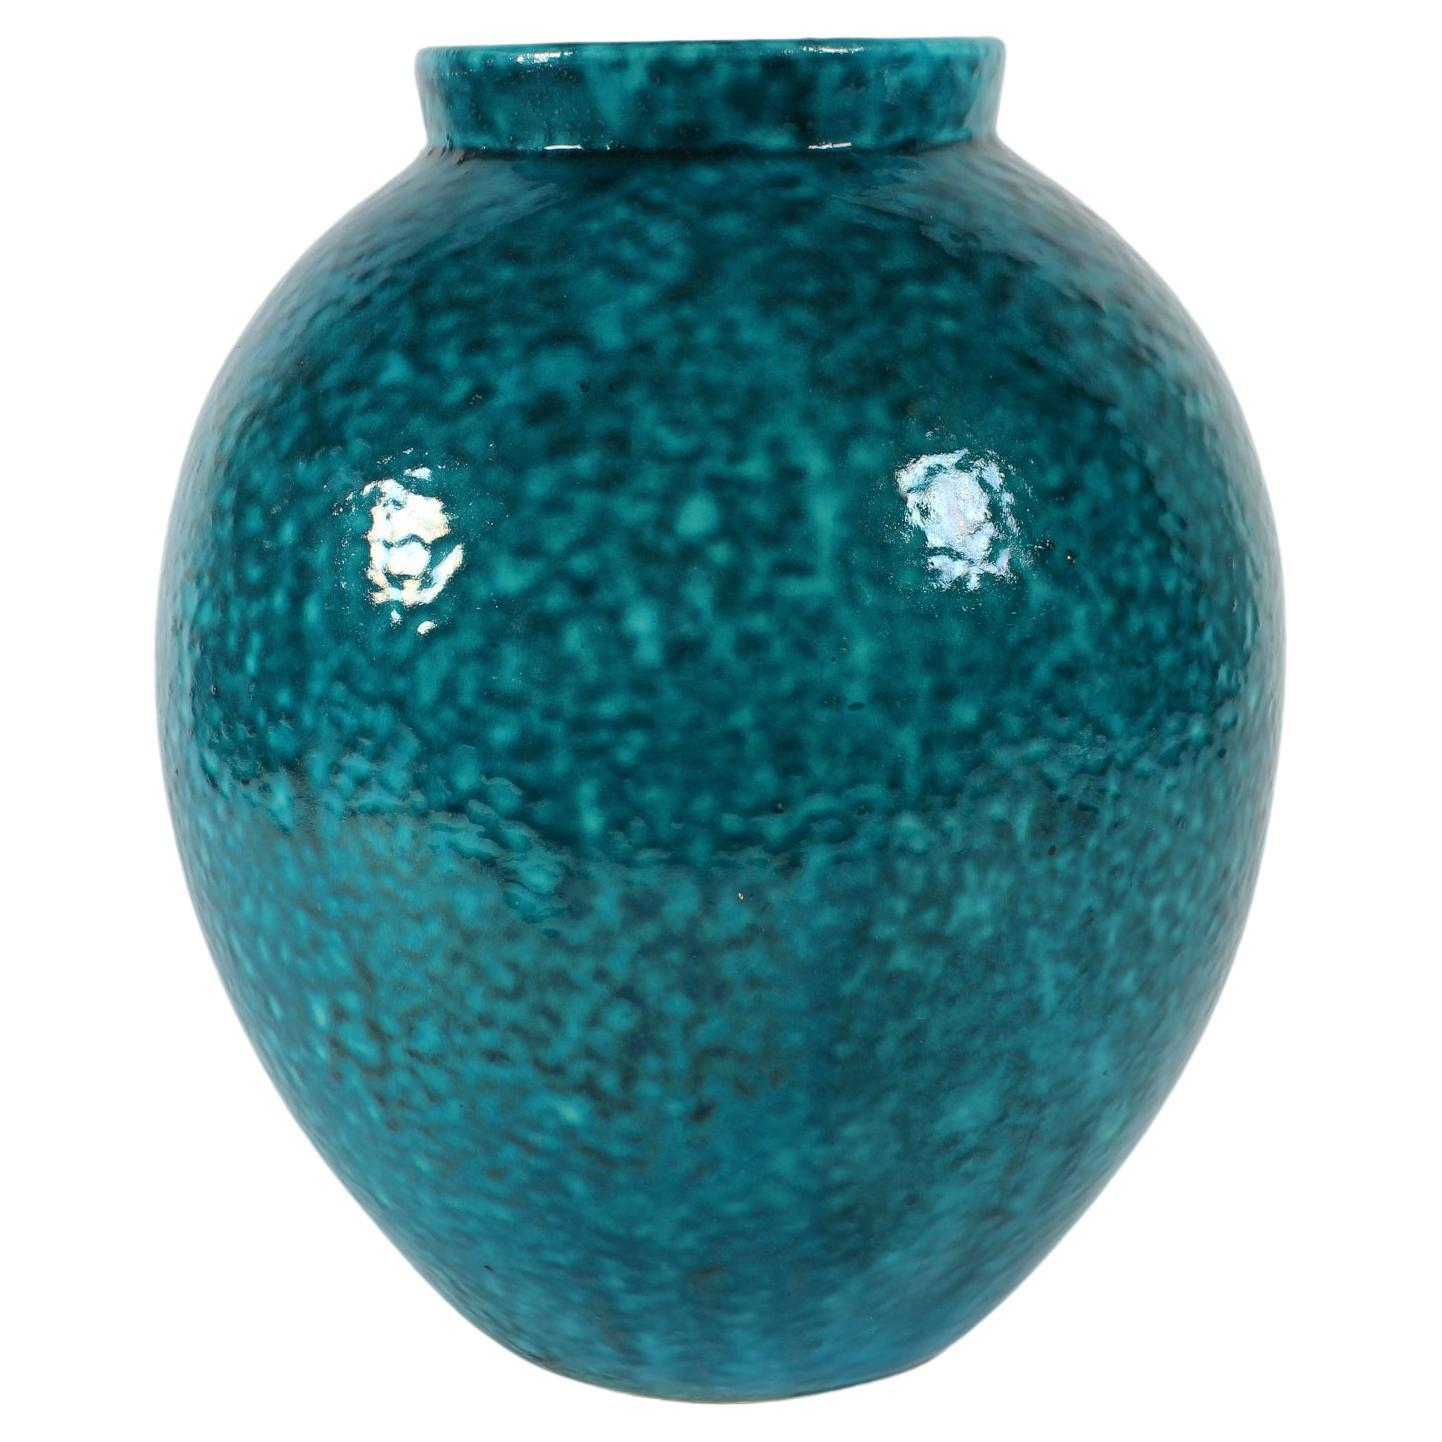 Danish Art Deco ceramic floor vase by the workshop Herman August Kähler (HAK). Made in the 1930s. 

The ceramic vase is decorated with glossy speckled turquoise glaze.

Hand-marked on bottom: HAK

Very good condition - no chips, cracks or